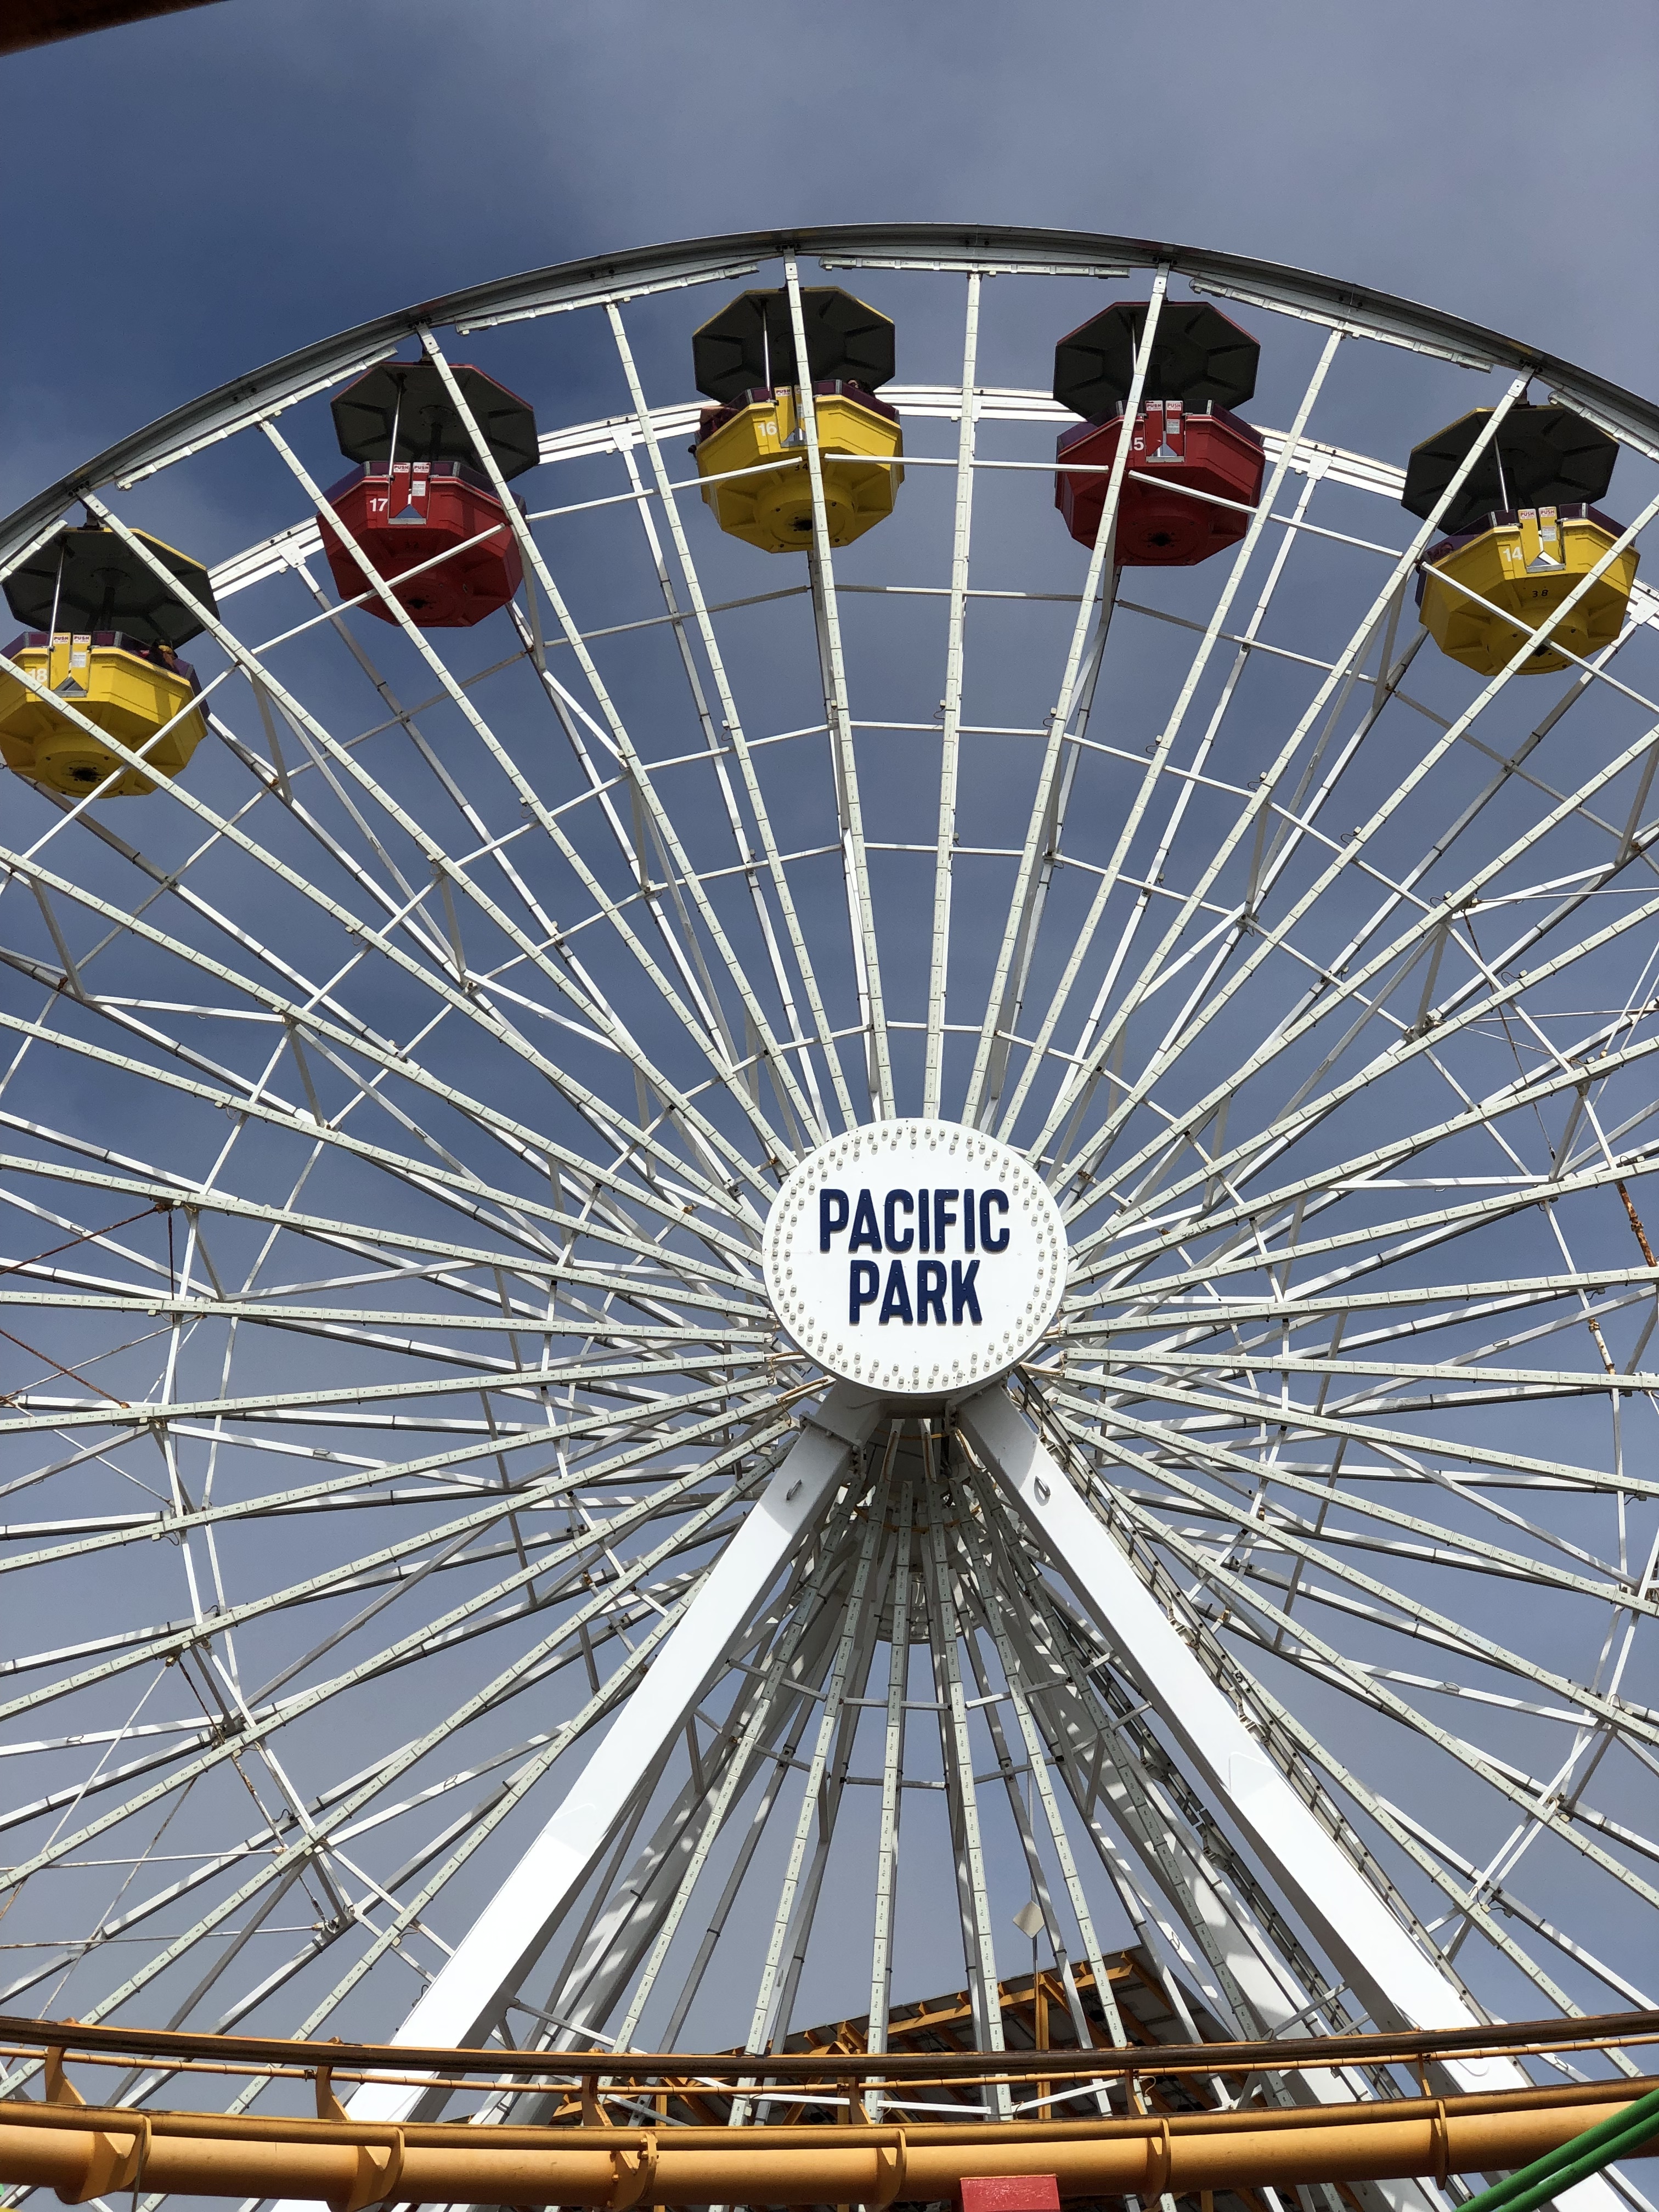 Fun Places to go in Santa Monica For The Entire Family – Pacific Park